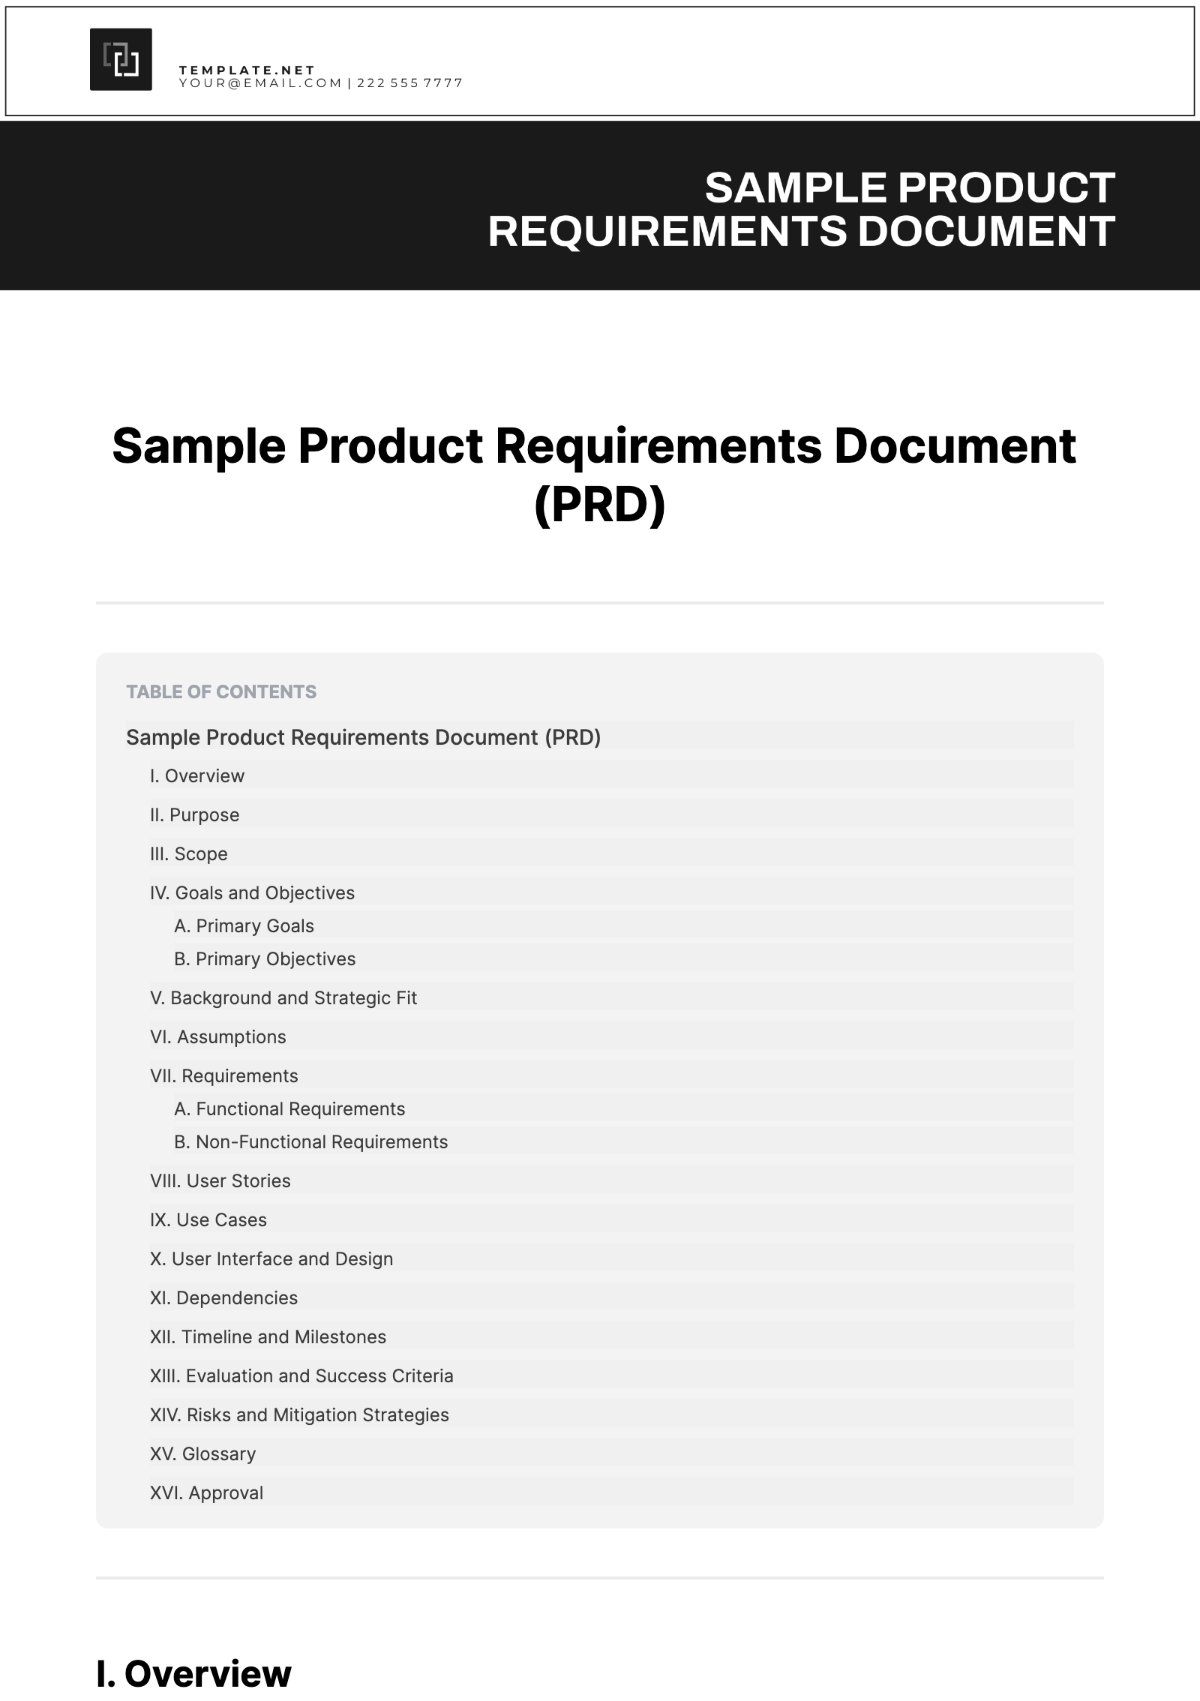 Sample Product Requirements Document Template